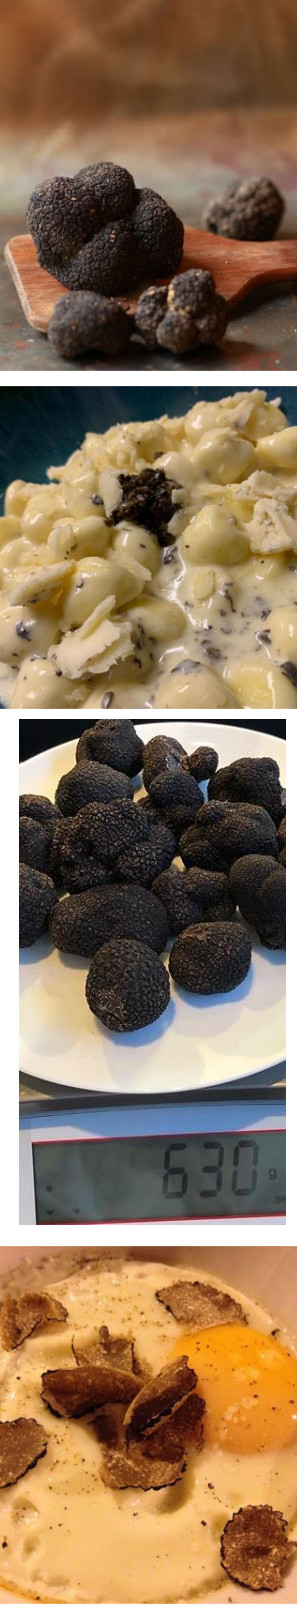 Truffle Cooking Class in Italy Venice